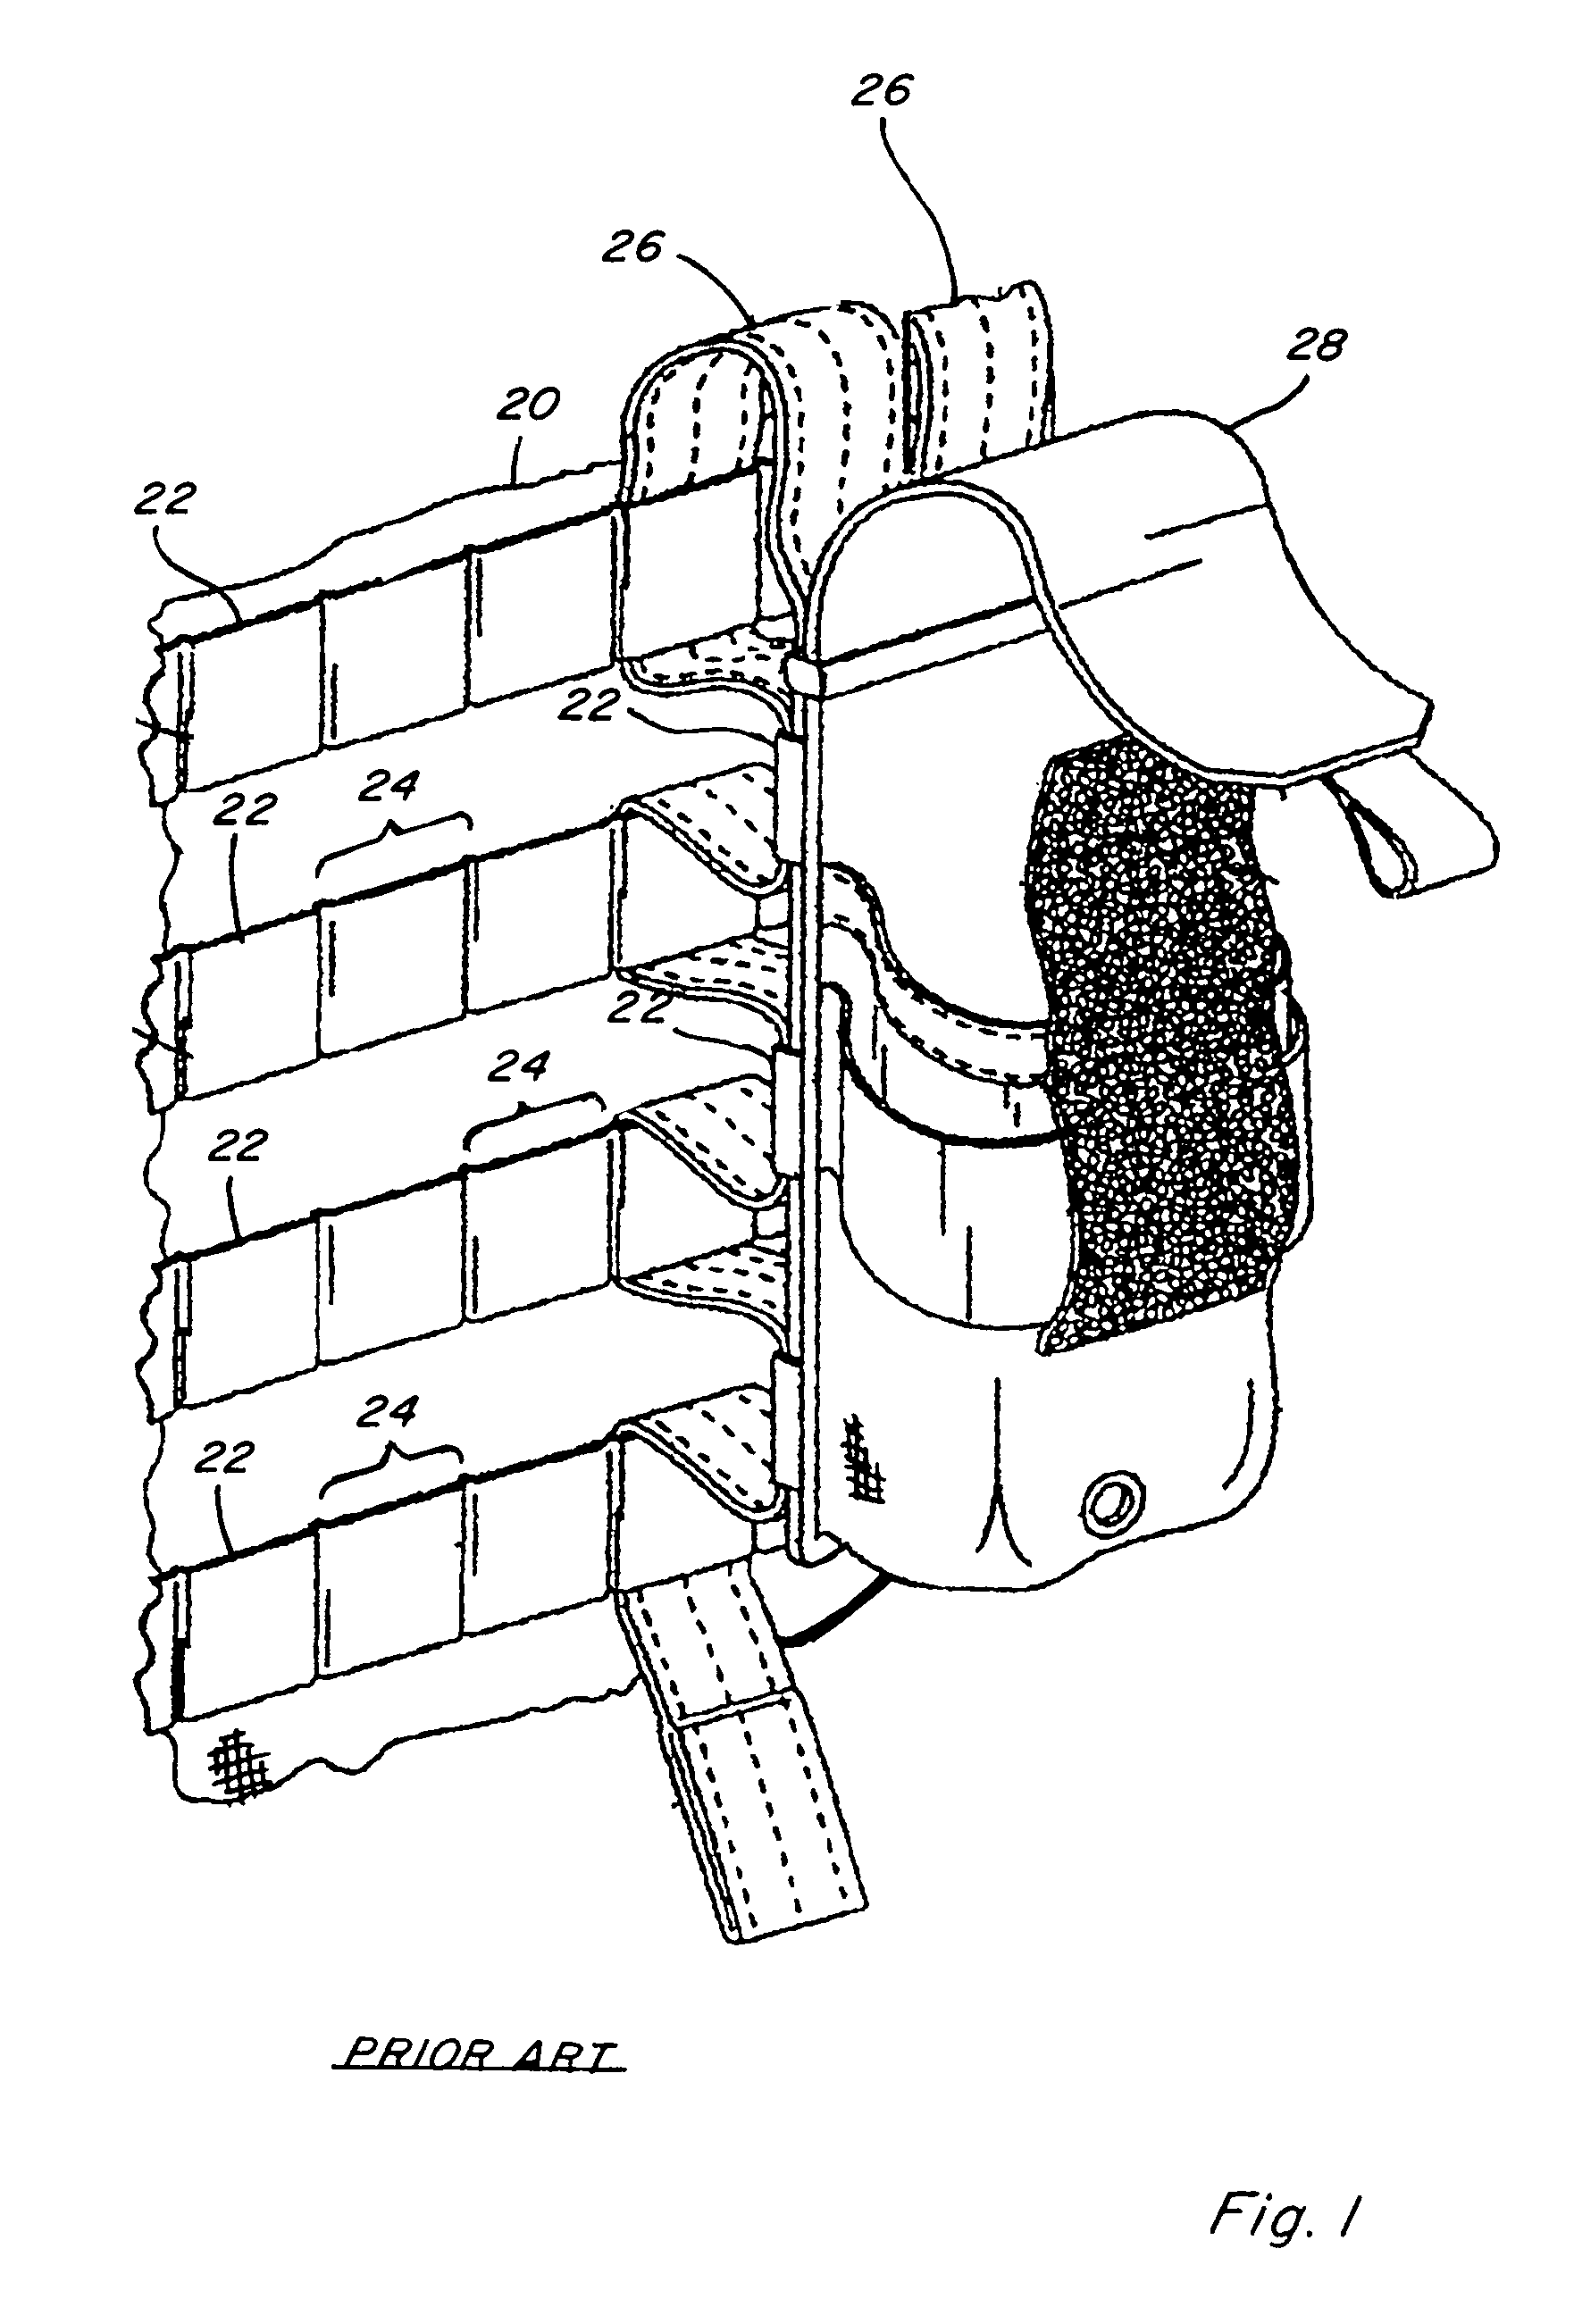 Light weight modular pouch attachment system and method